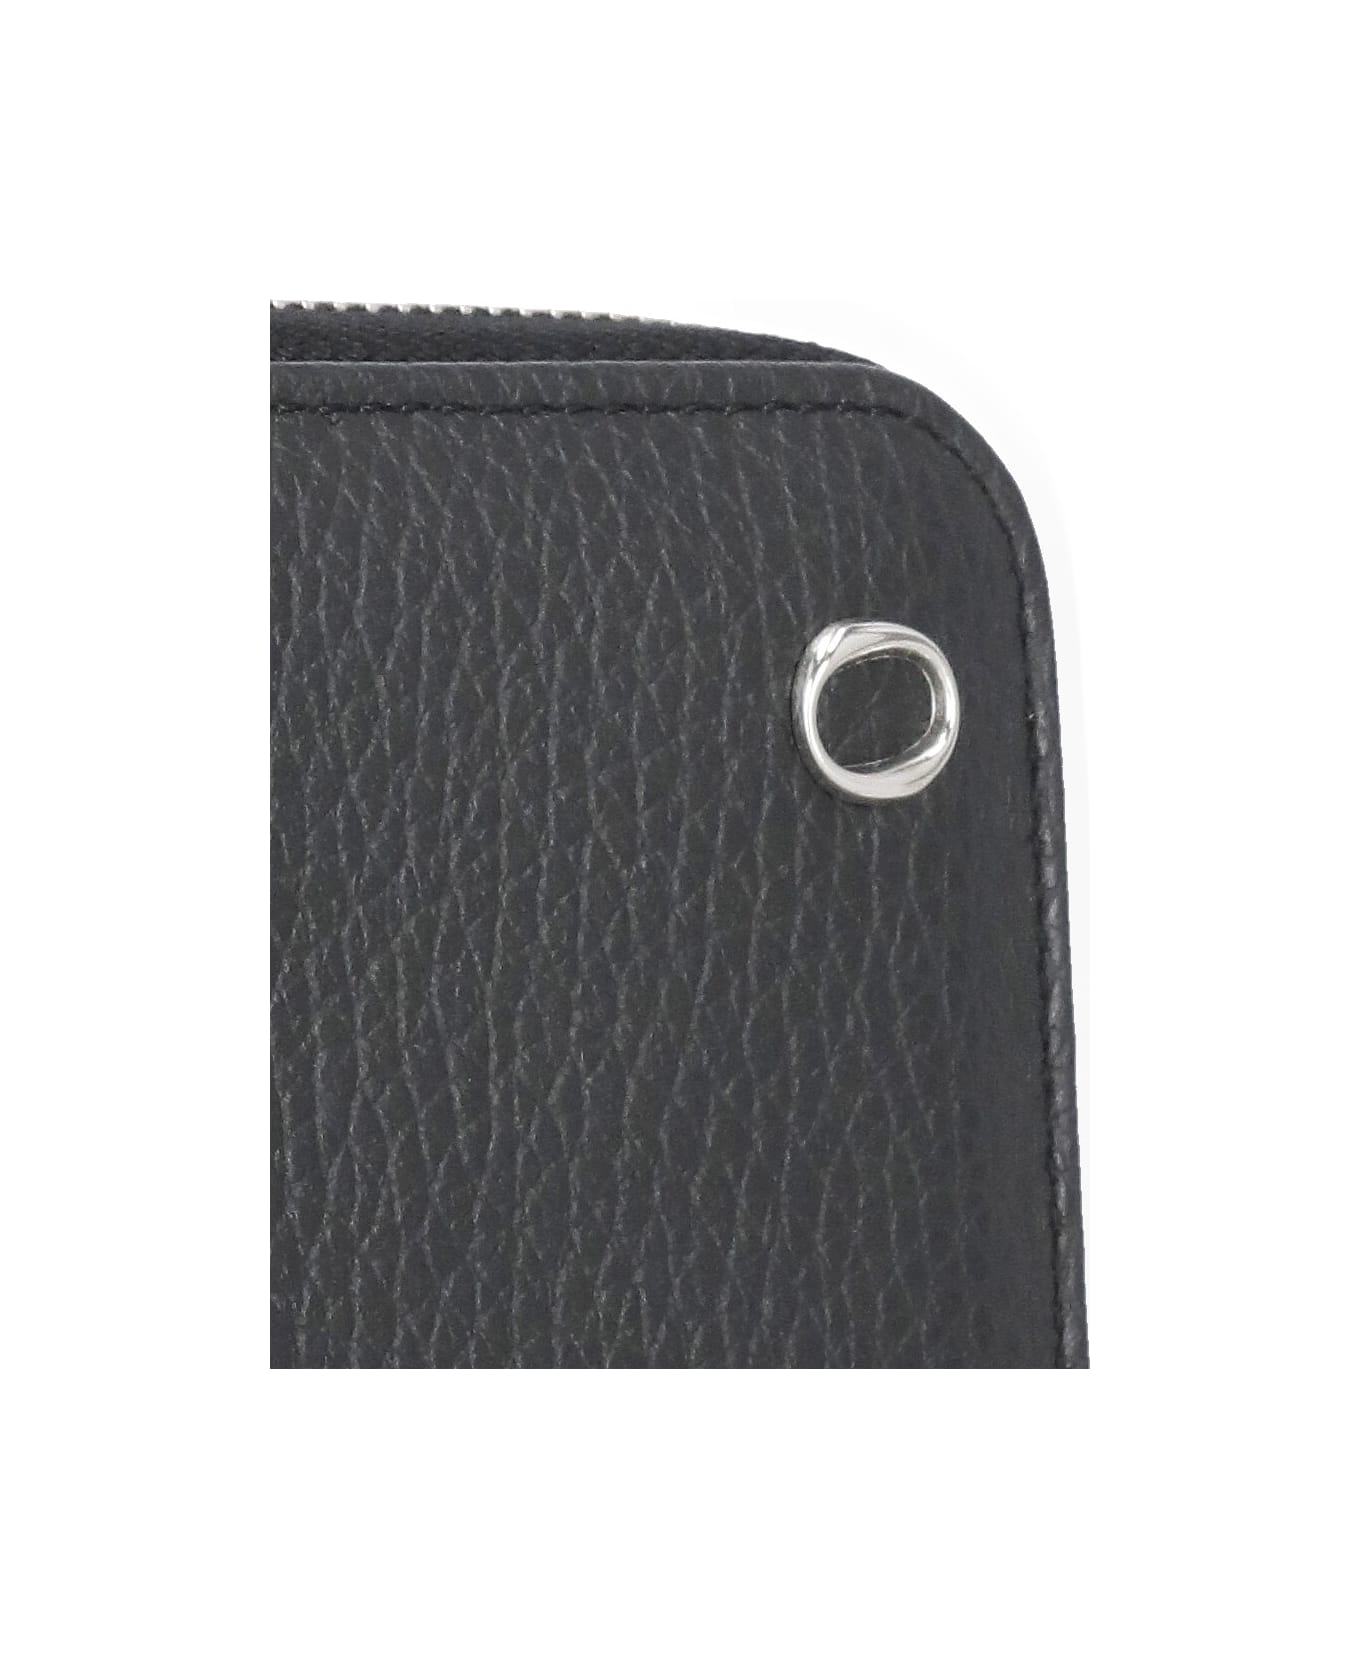 Orciani Micron Leather Wallet - Black 財布